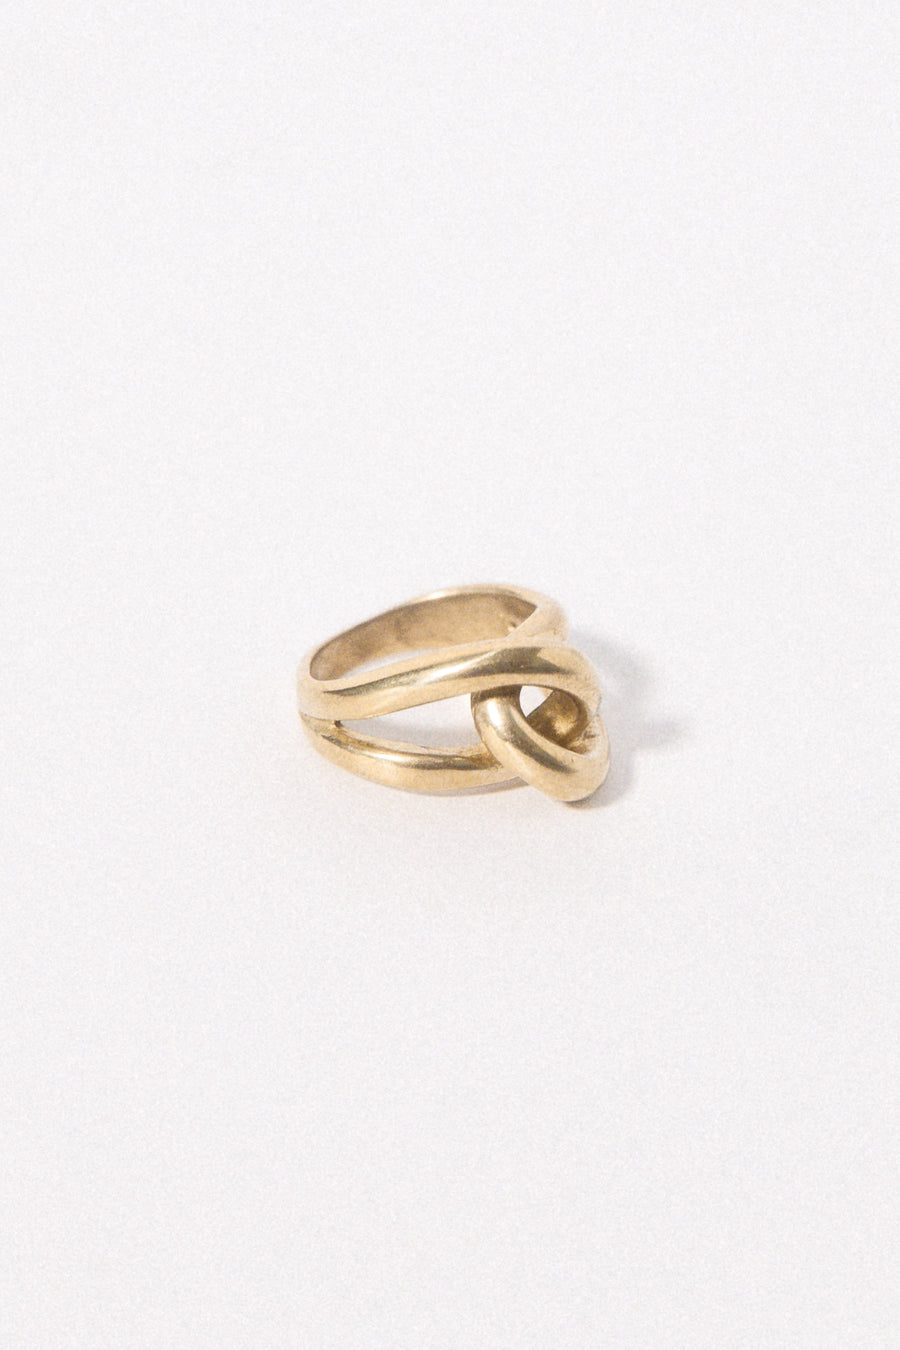 Cashmere Cactus Jewelry US 3.5 / Brass Anoint Ring .. Brass